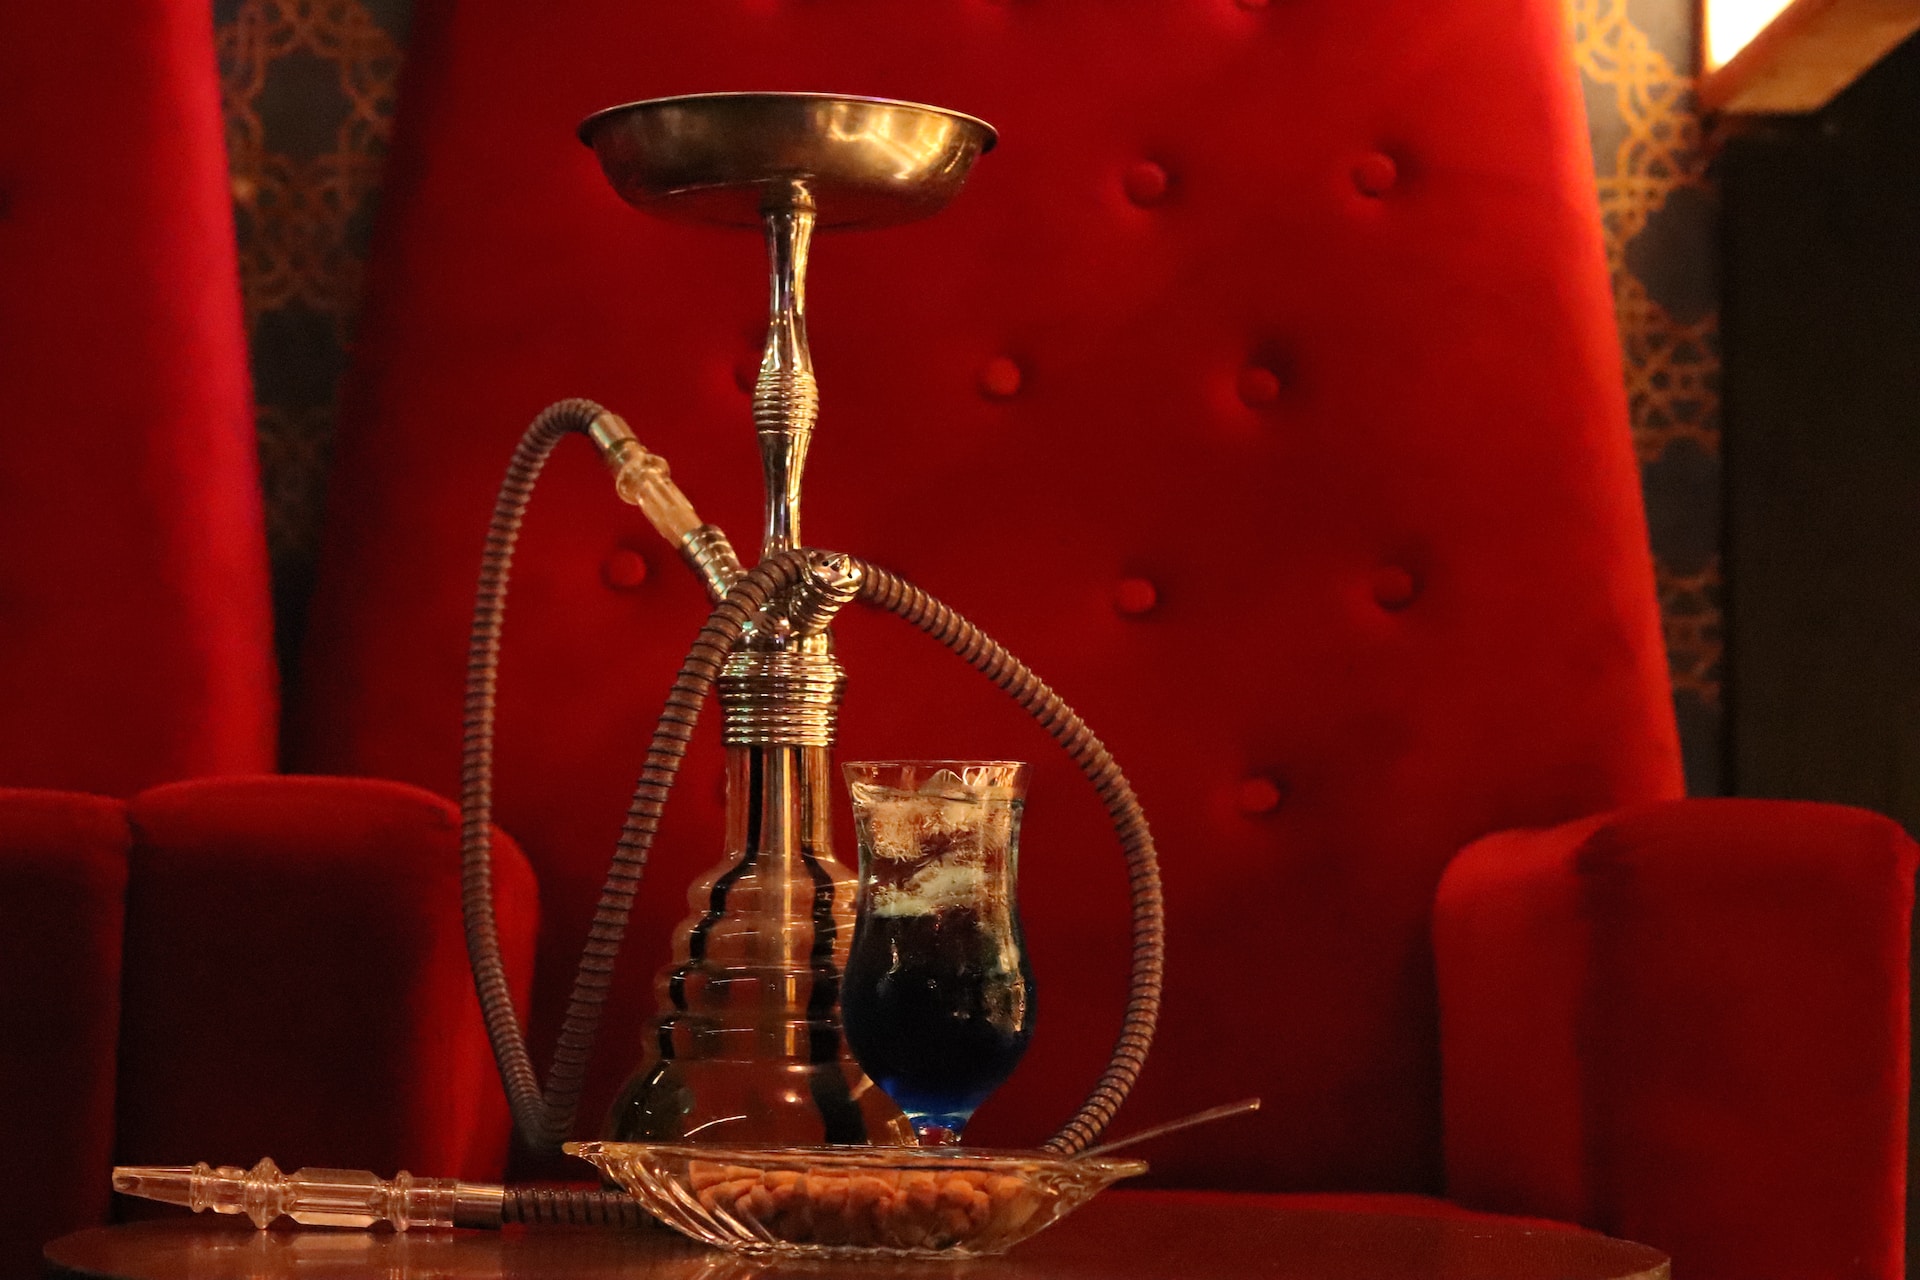 What Are the Signs of Spoiled Shisha and How to Identify Them?